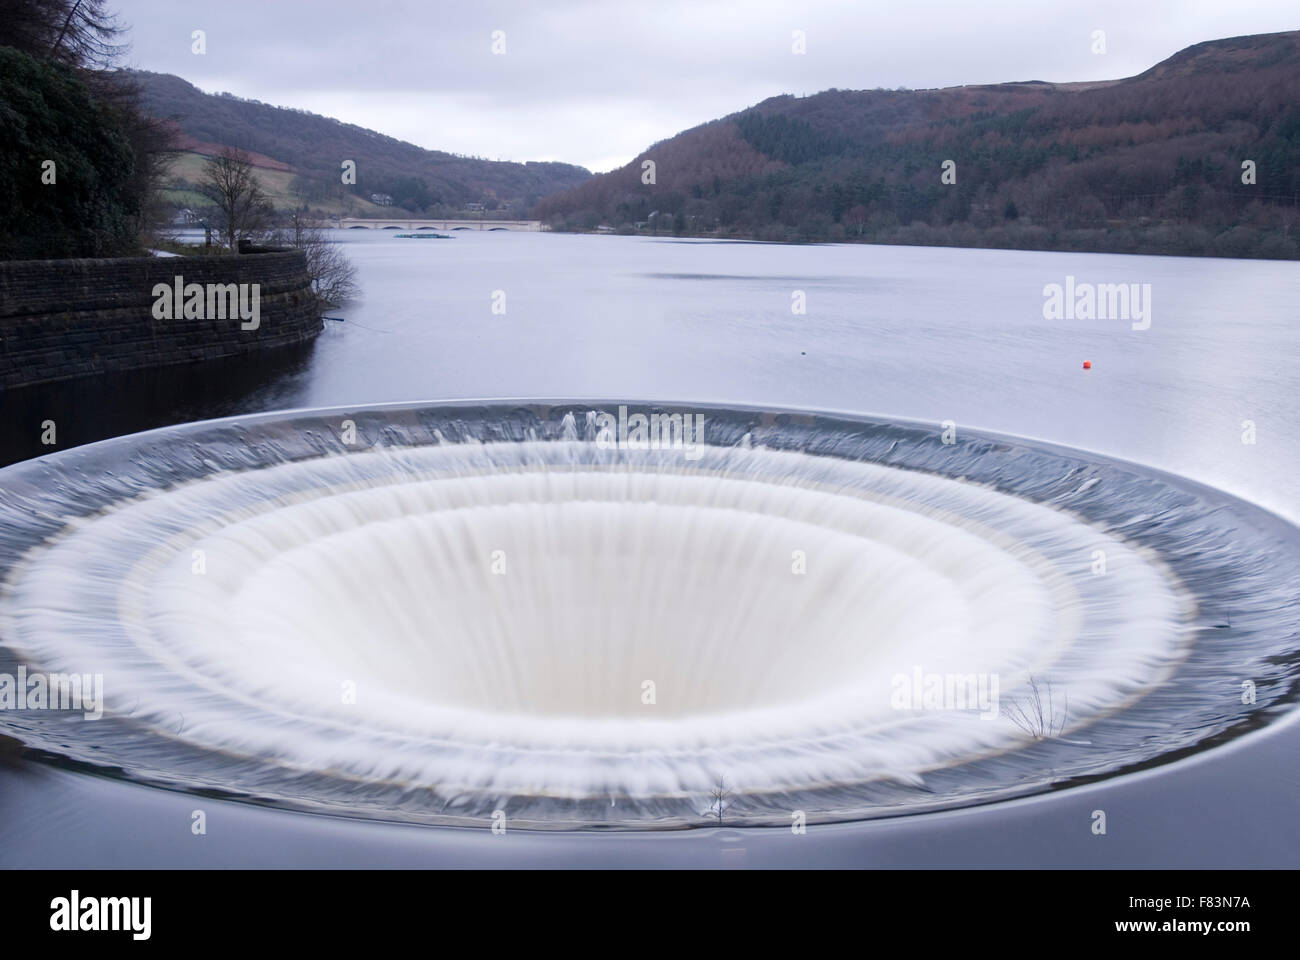 DERBYSHIRE UK - 06 Oct : Ladybower reservoir bellmouth overflow plug hole and draw off tower on 16 Feb 2014 in the Peak District Stock Photo